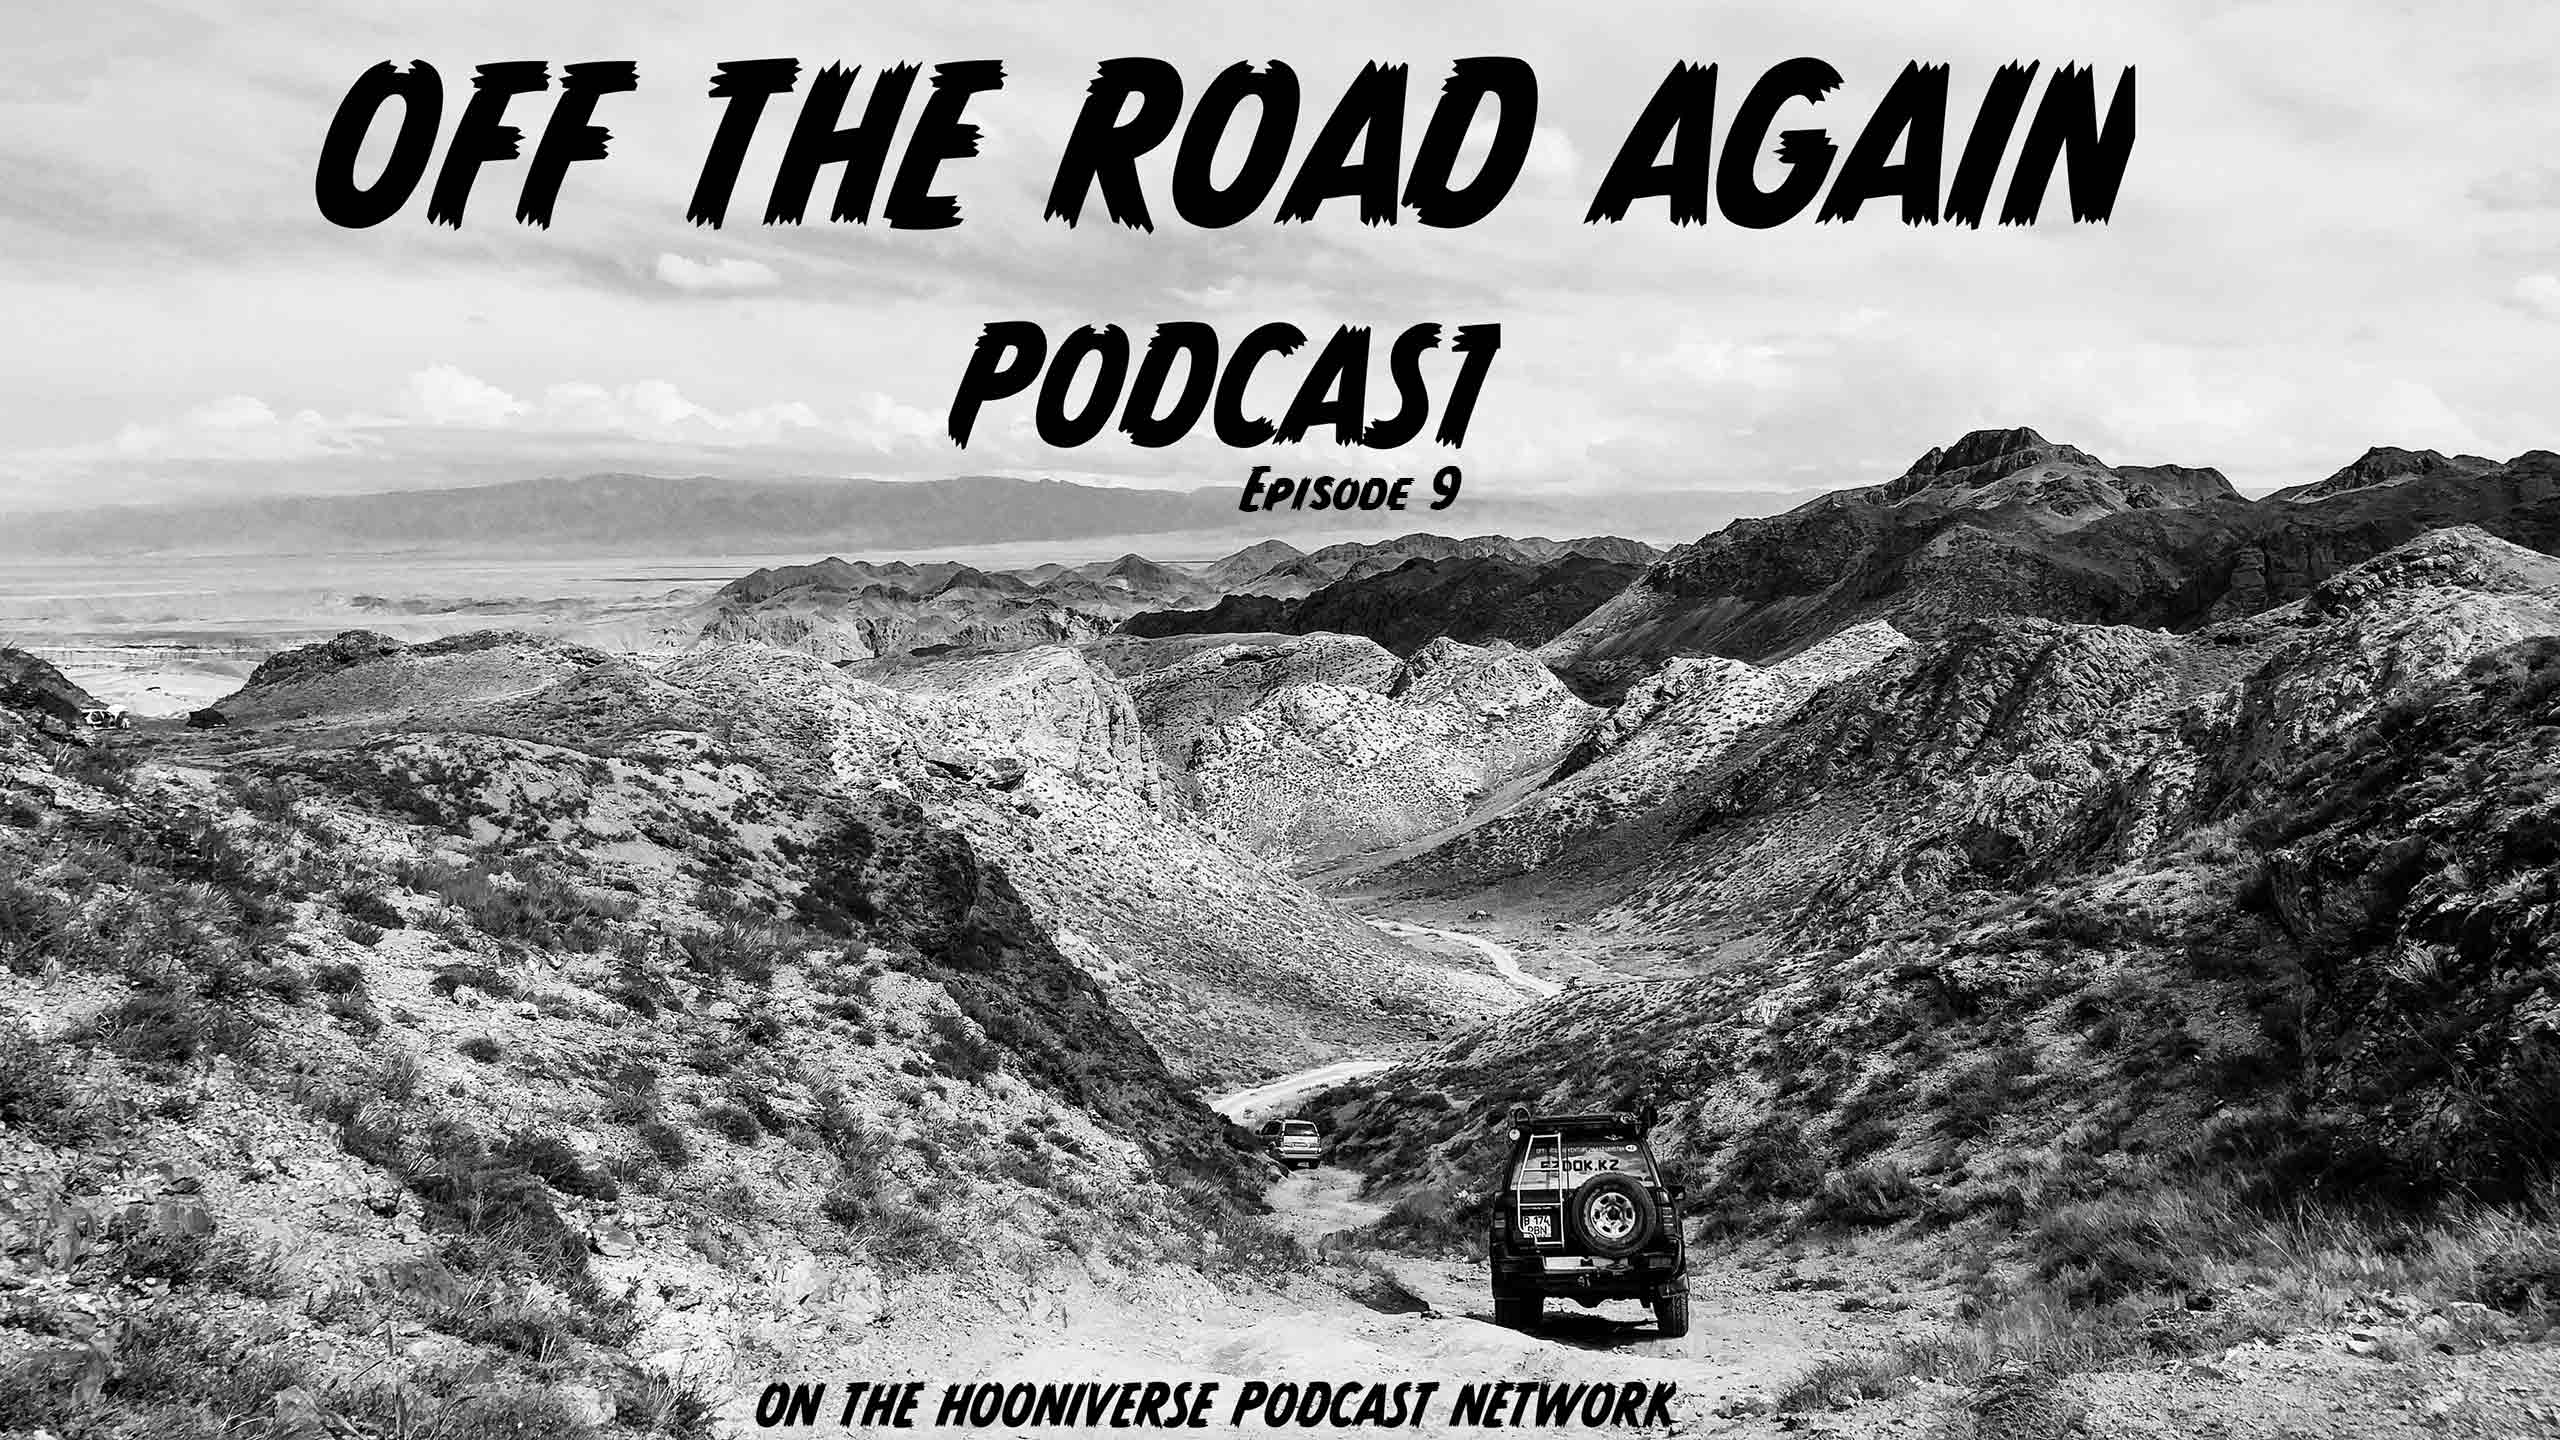 Off The Road Again Podcast - Episode 9